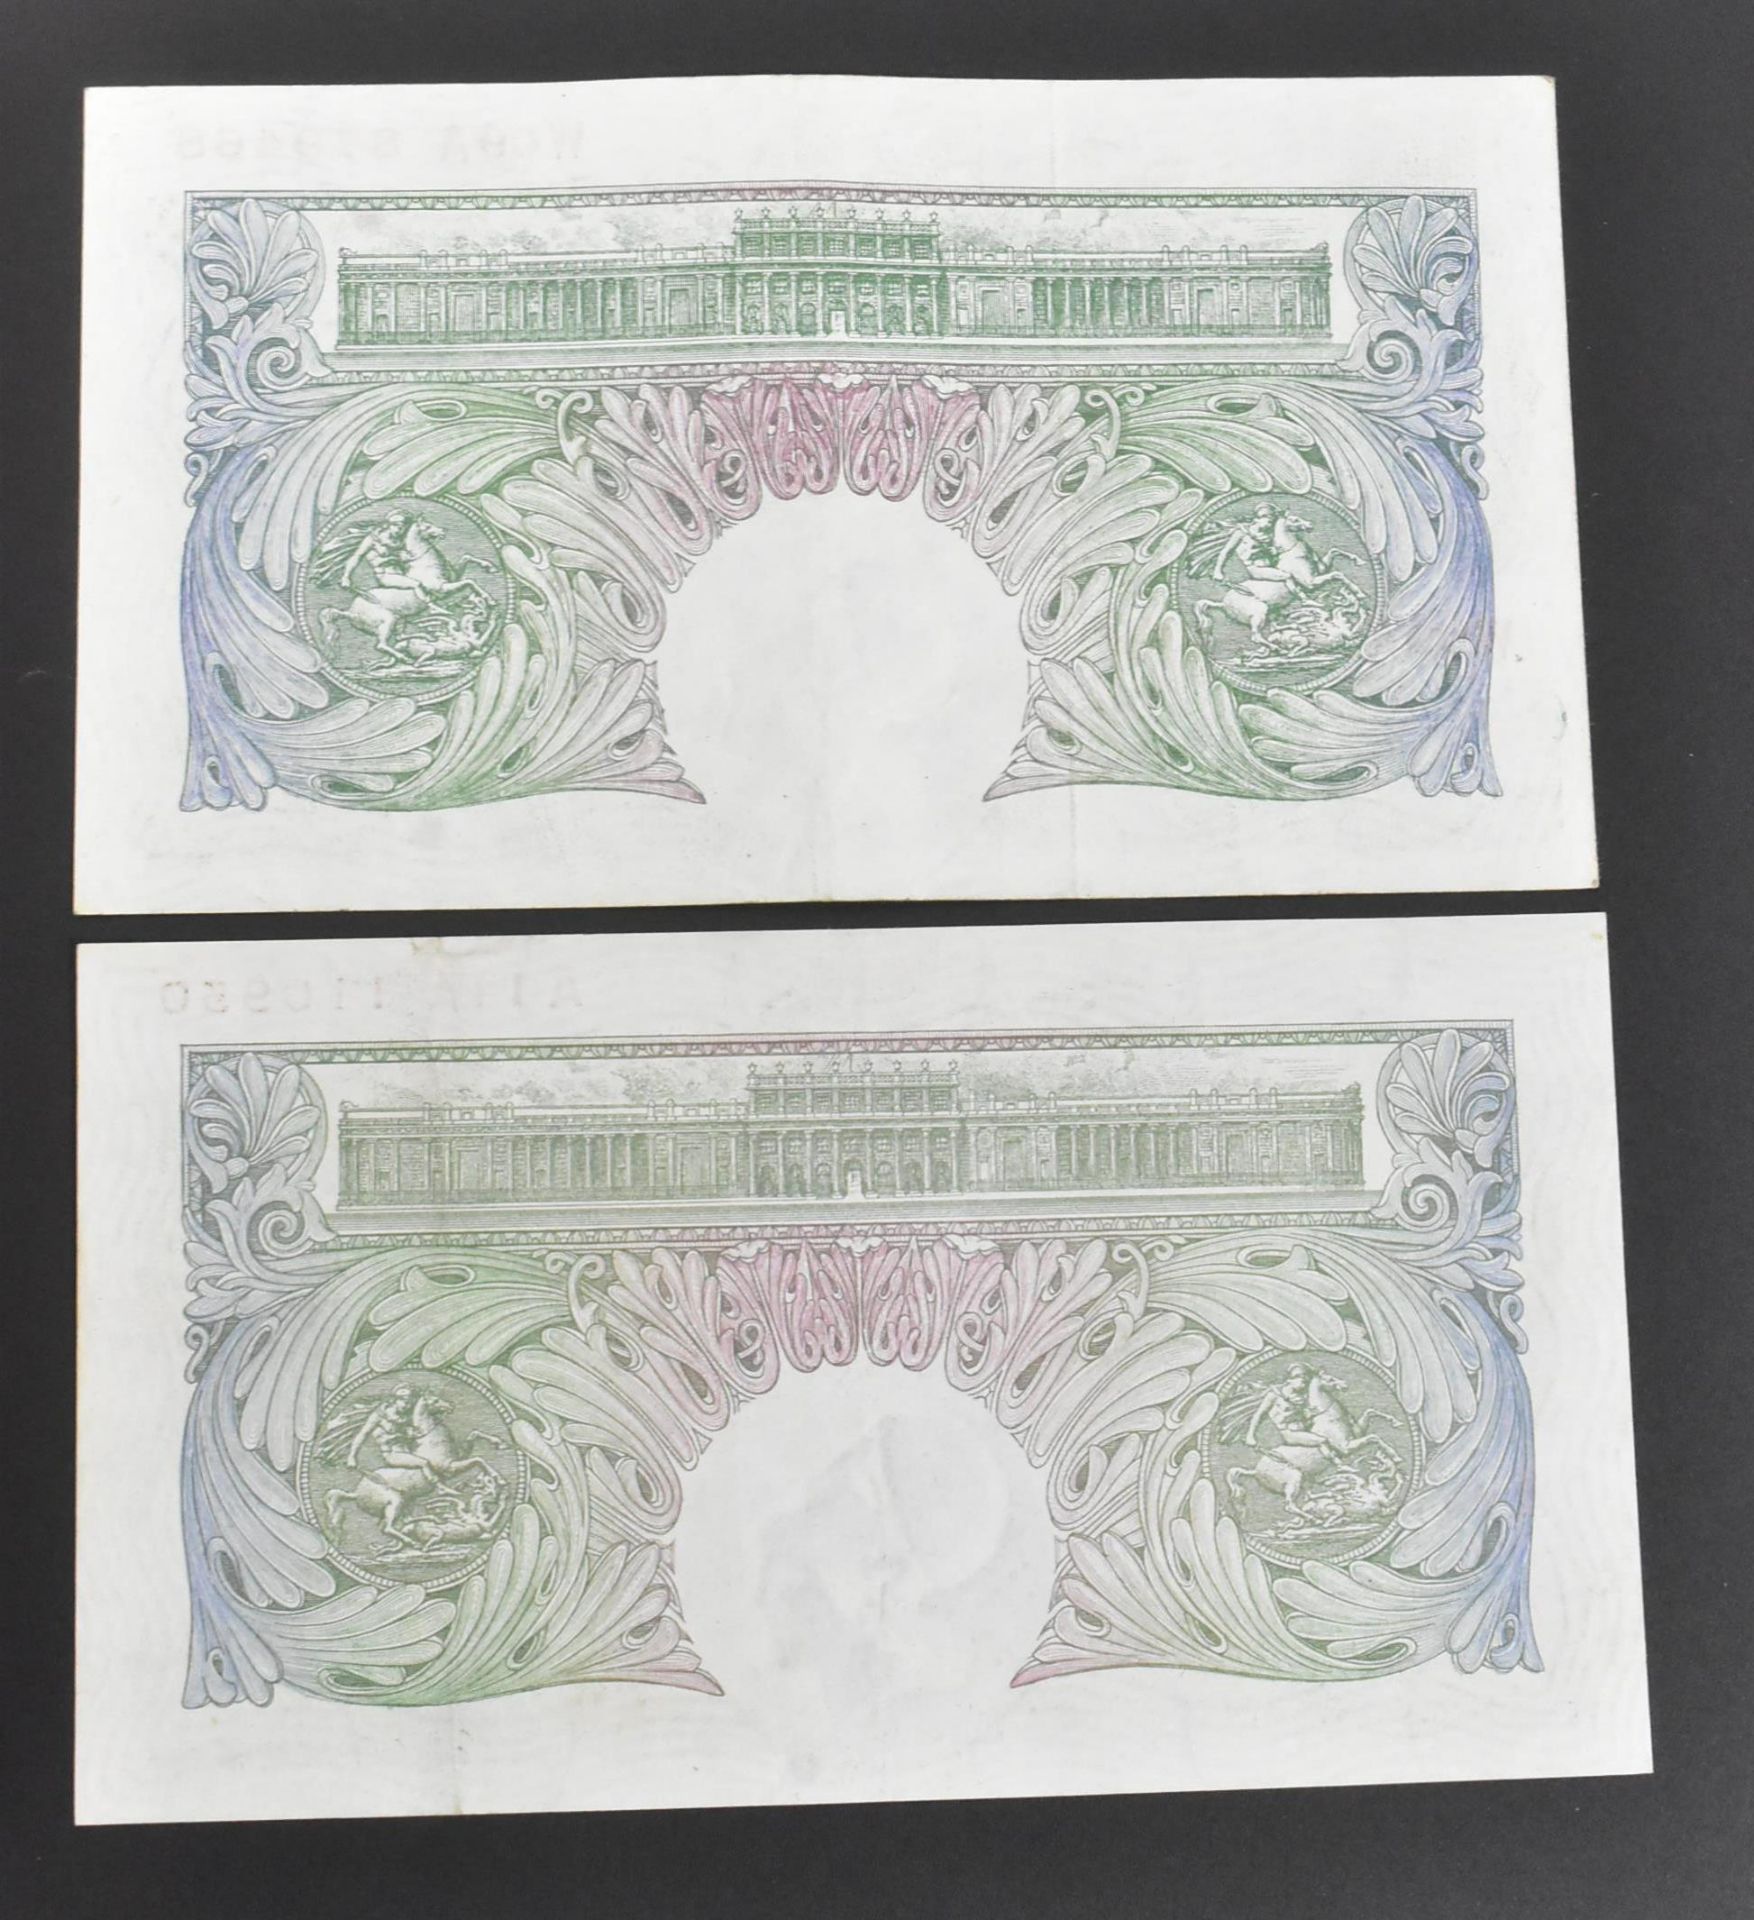 COLLECTION BRITISH UNCIRCULATED BANK NOTES - Image 35 of 61